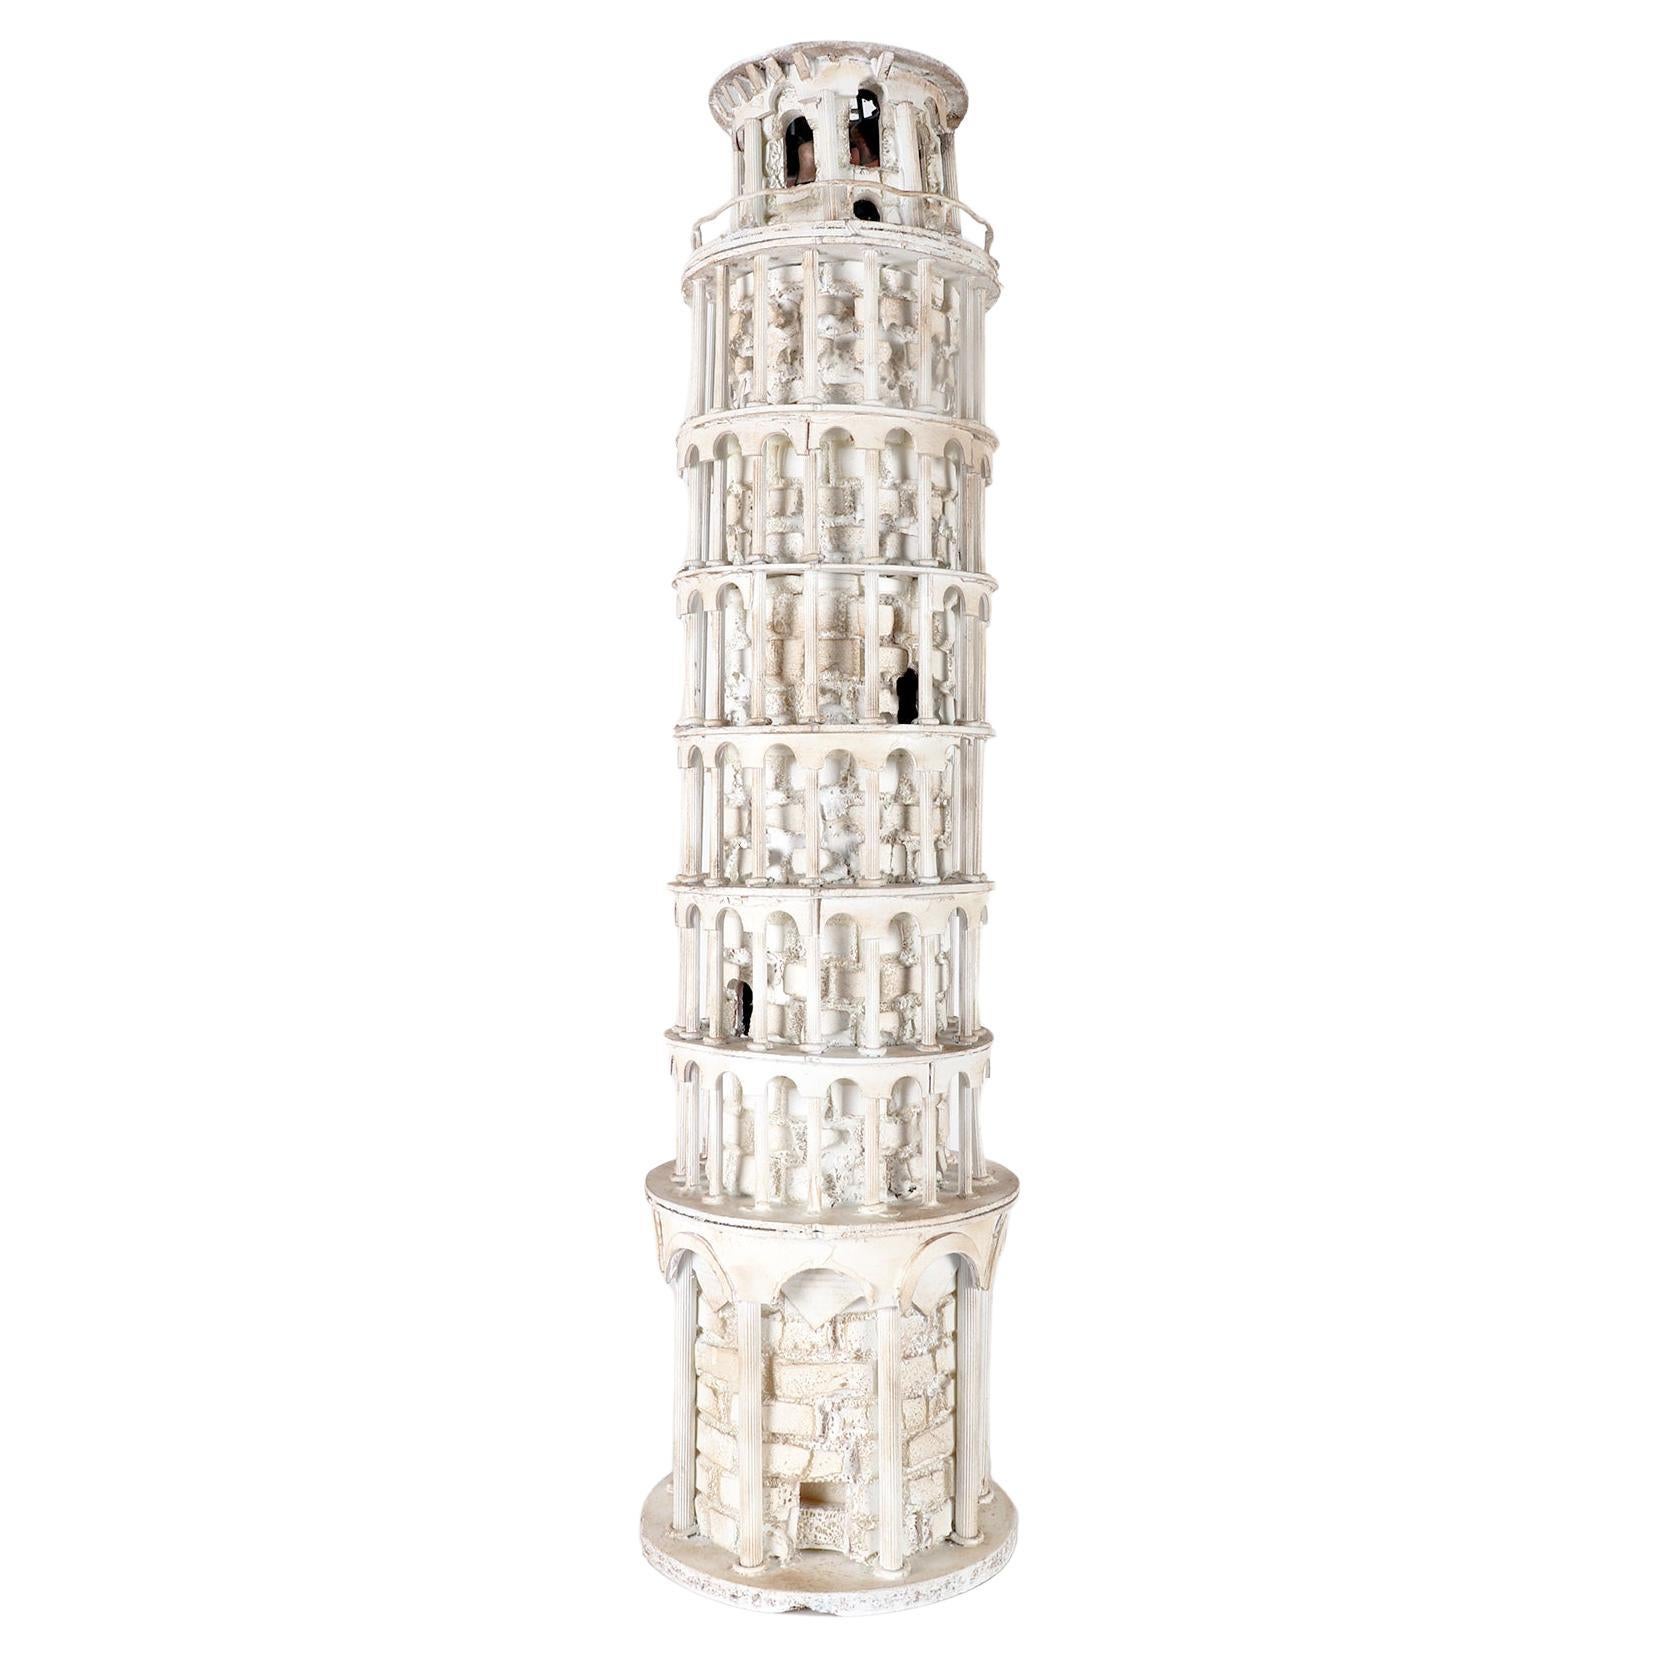 A Grand Tour wooden maquette, depicting the Tower of Pisa, Italy 1950. For Sale